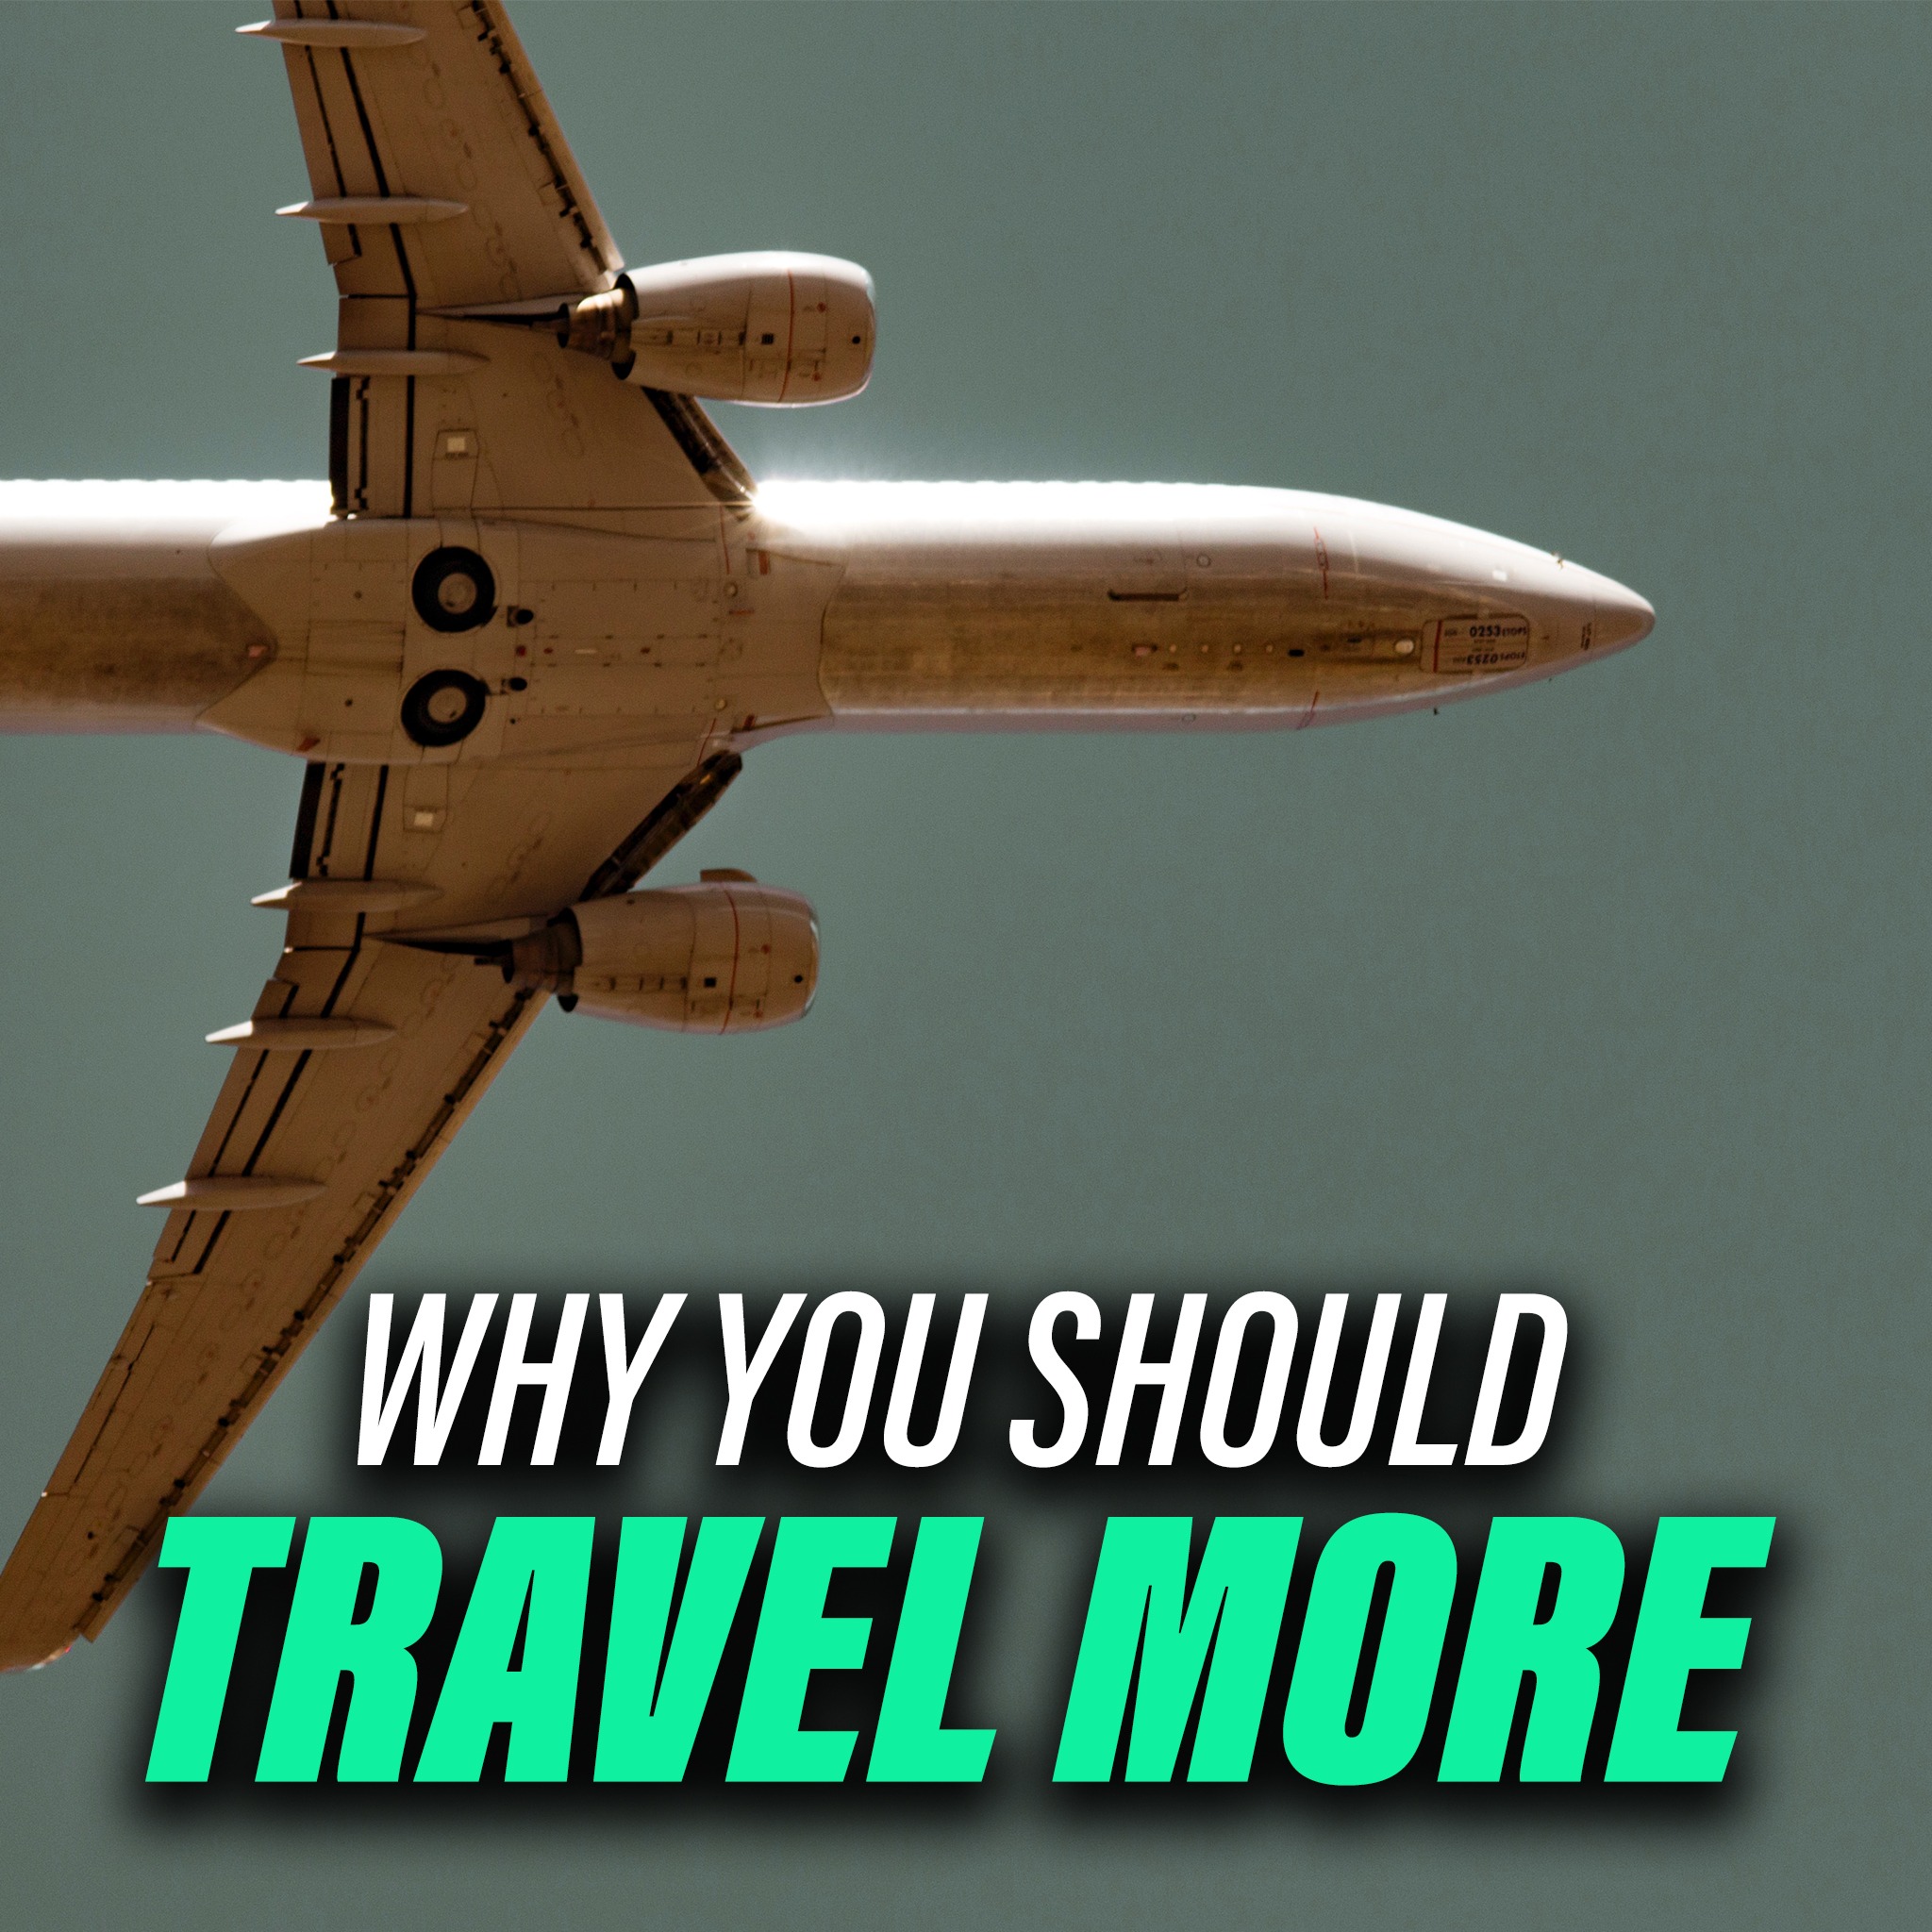 Why You Should Travel More